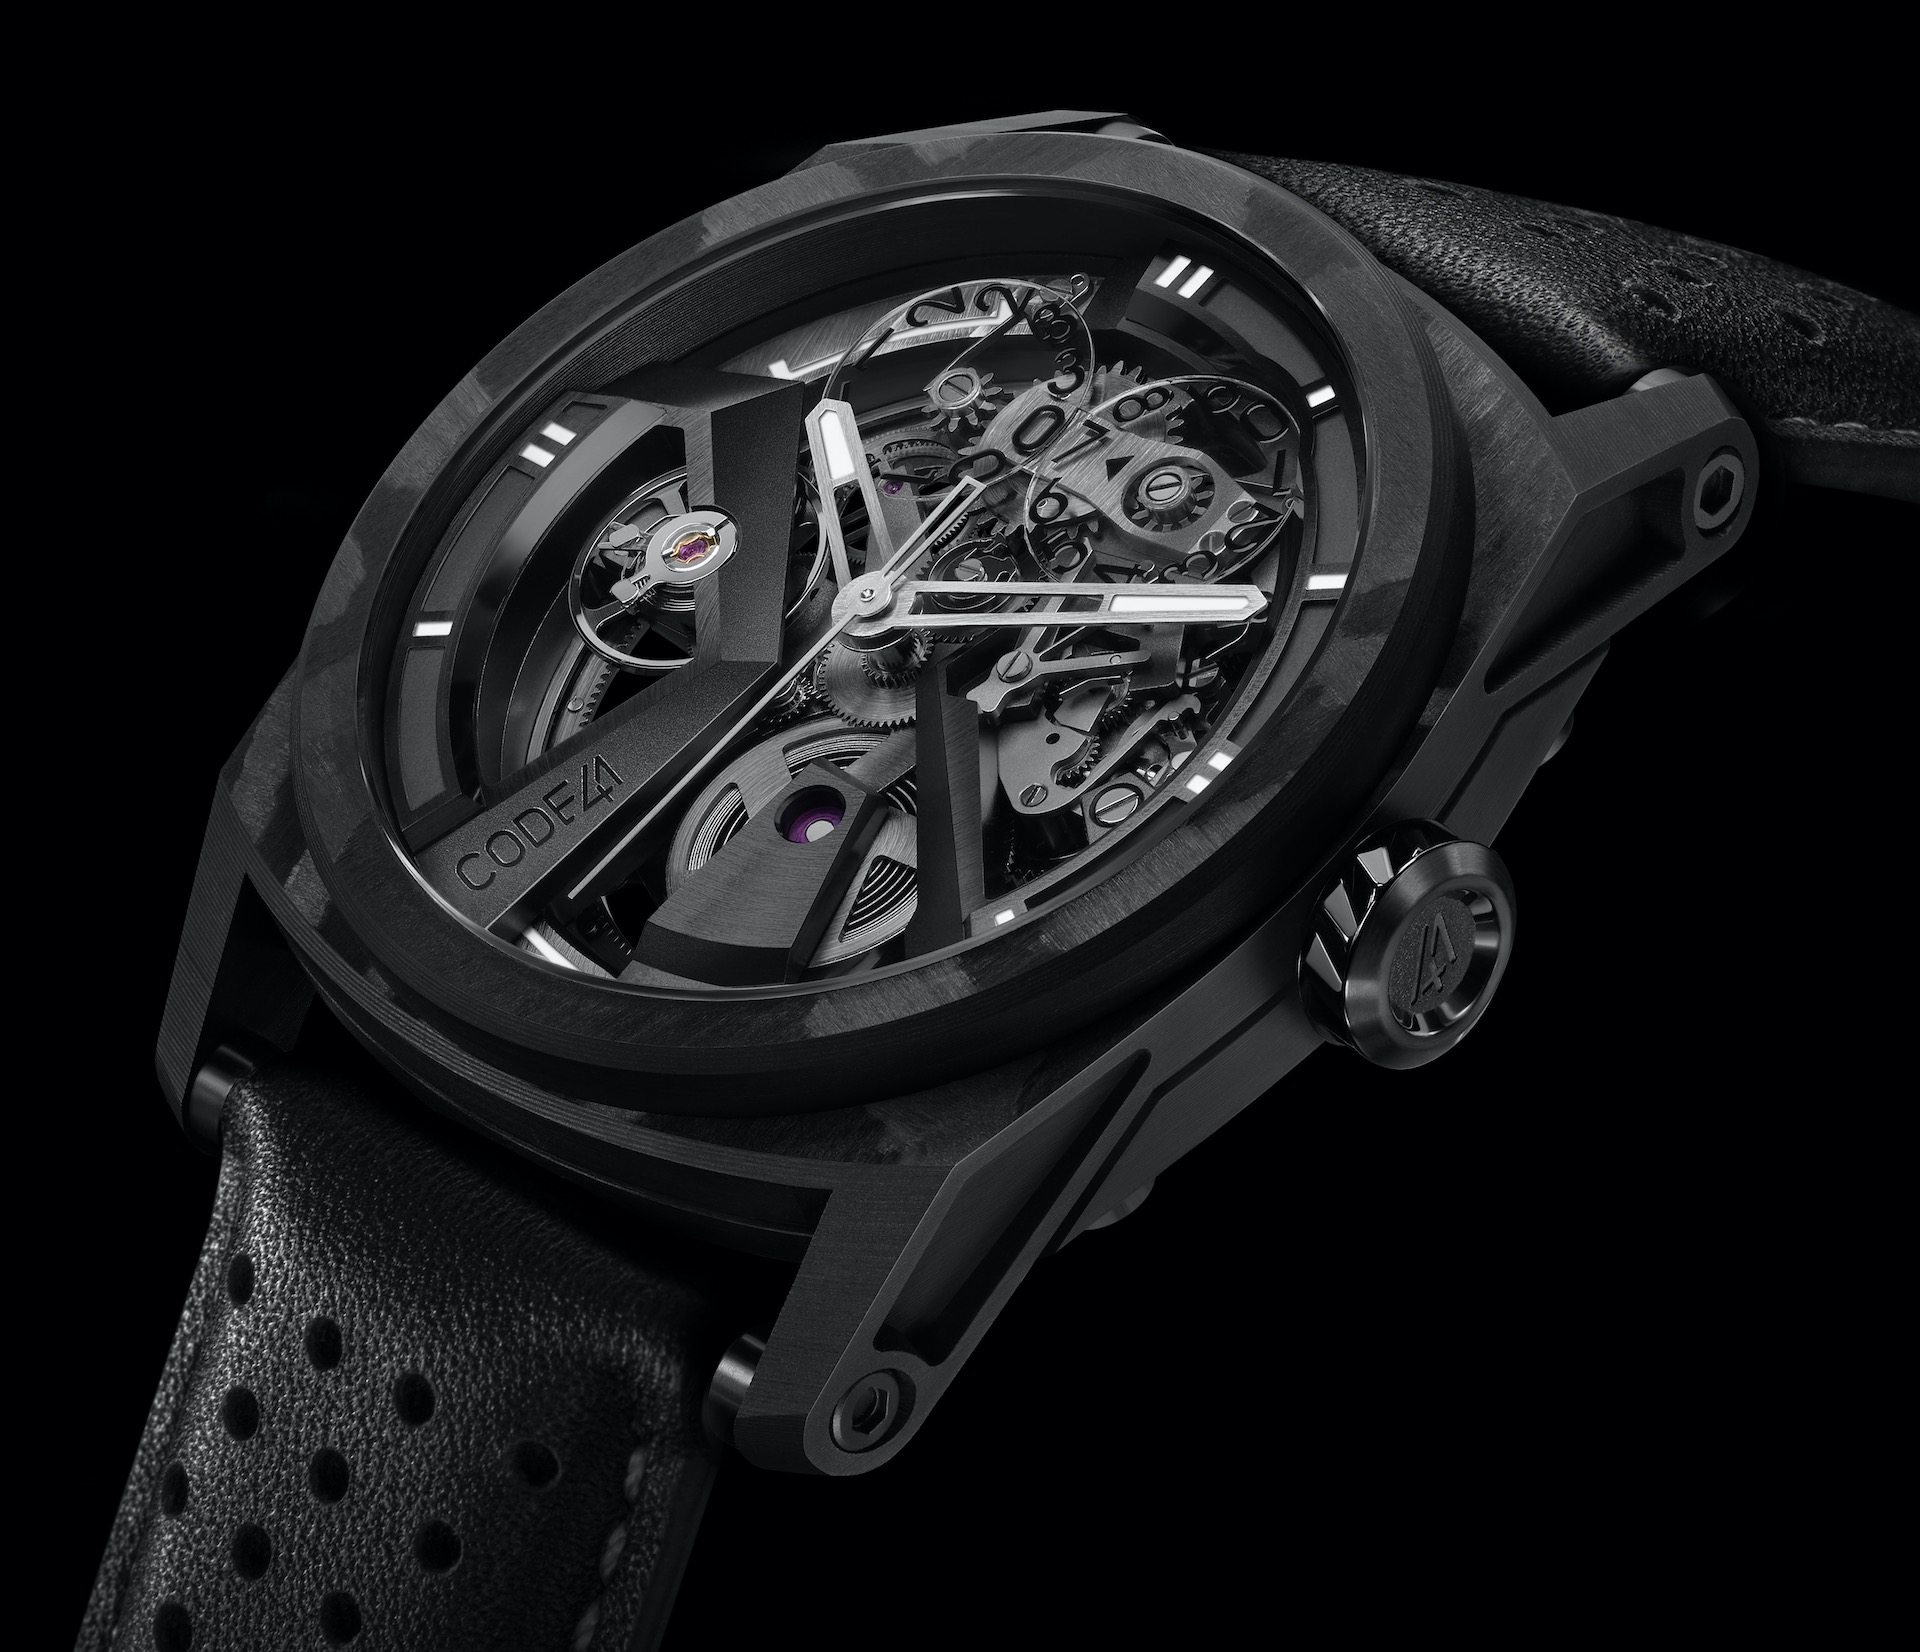 CODE41 X41: Edition 4 AeroCarbon Offers High-End Swiss Watchmaking At A Fraction Of The Cost